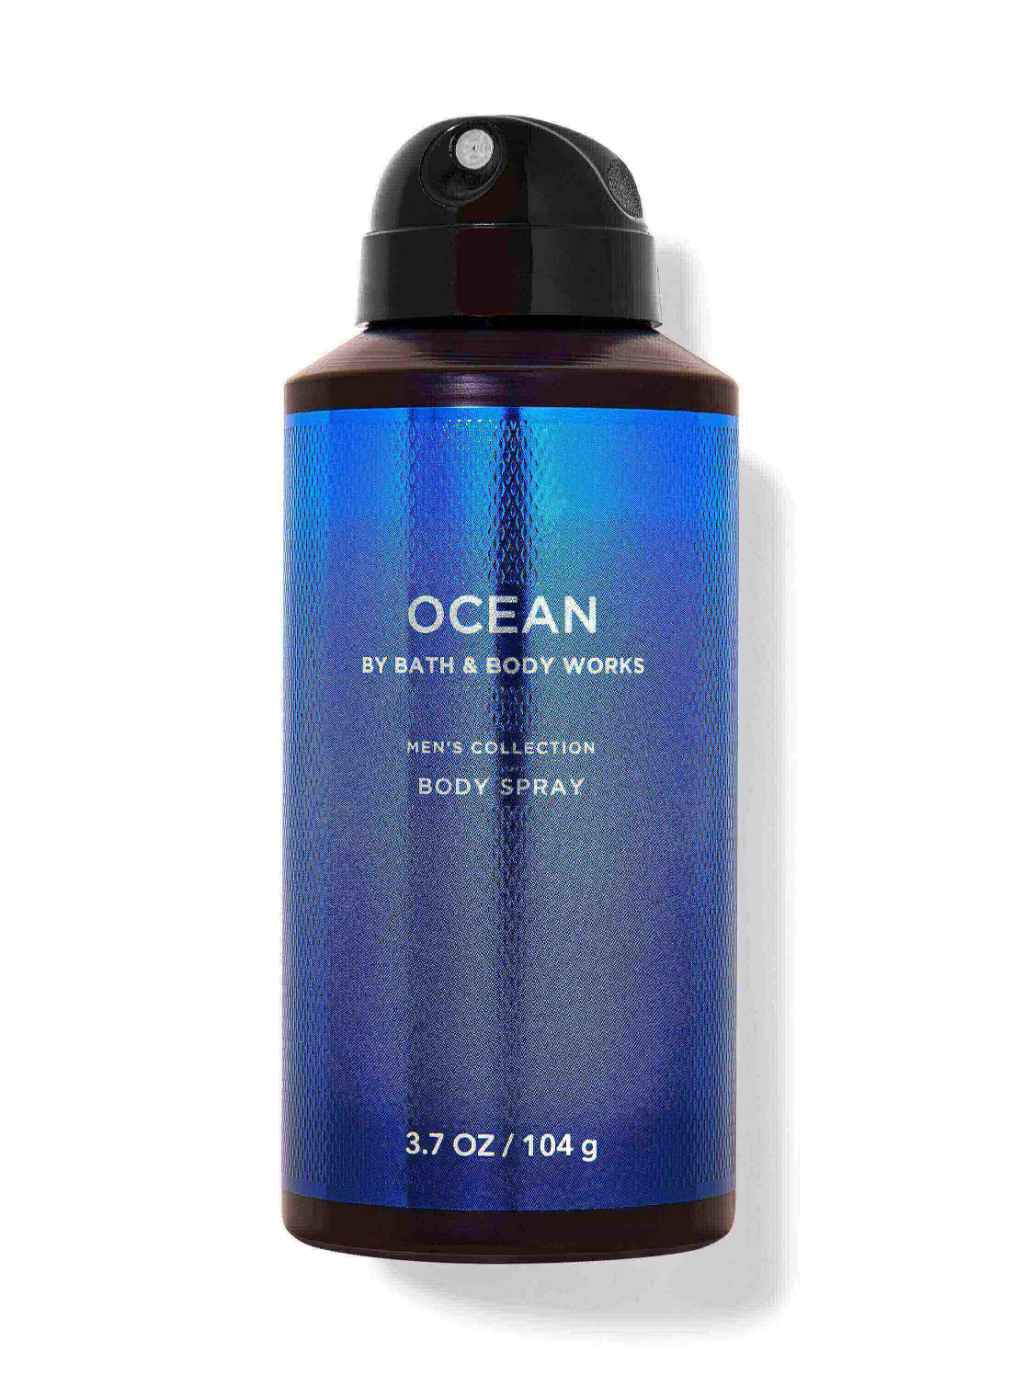 Bath and Body Works discounts | Get one and the second free on Ocean Body Splash